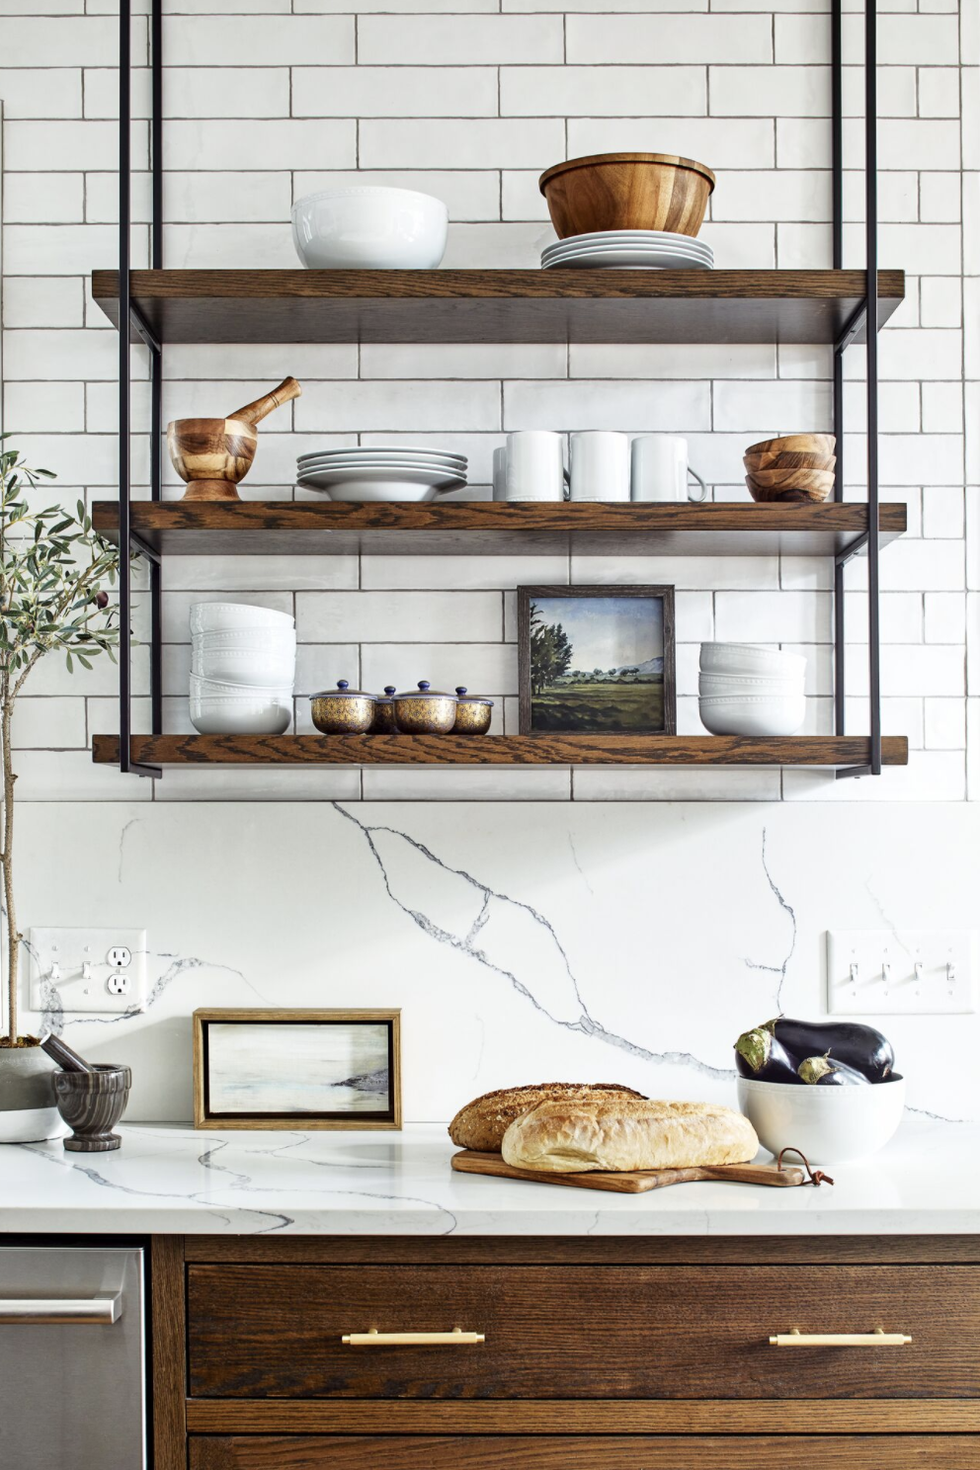 https://hips.hearstapps.com/hmg-prod/images/french-country-kitchen-ideas-stacy-zarin-goldberg-designed-by-elizabeth-reich-of-jenkins-baer-associates-1649037264.png?crop=0.9393939393939394xw:1xh;center,top&resize=980:*